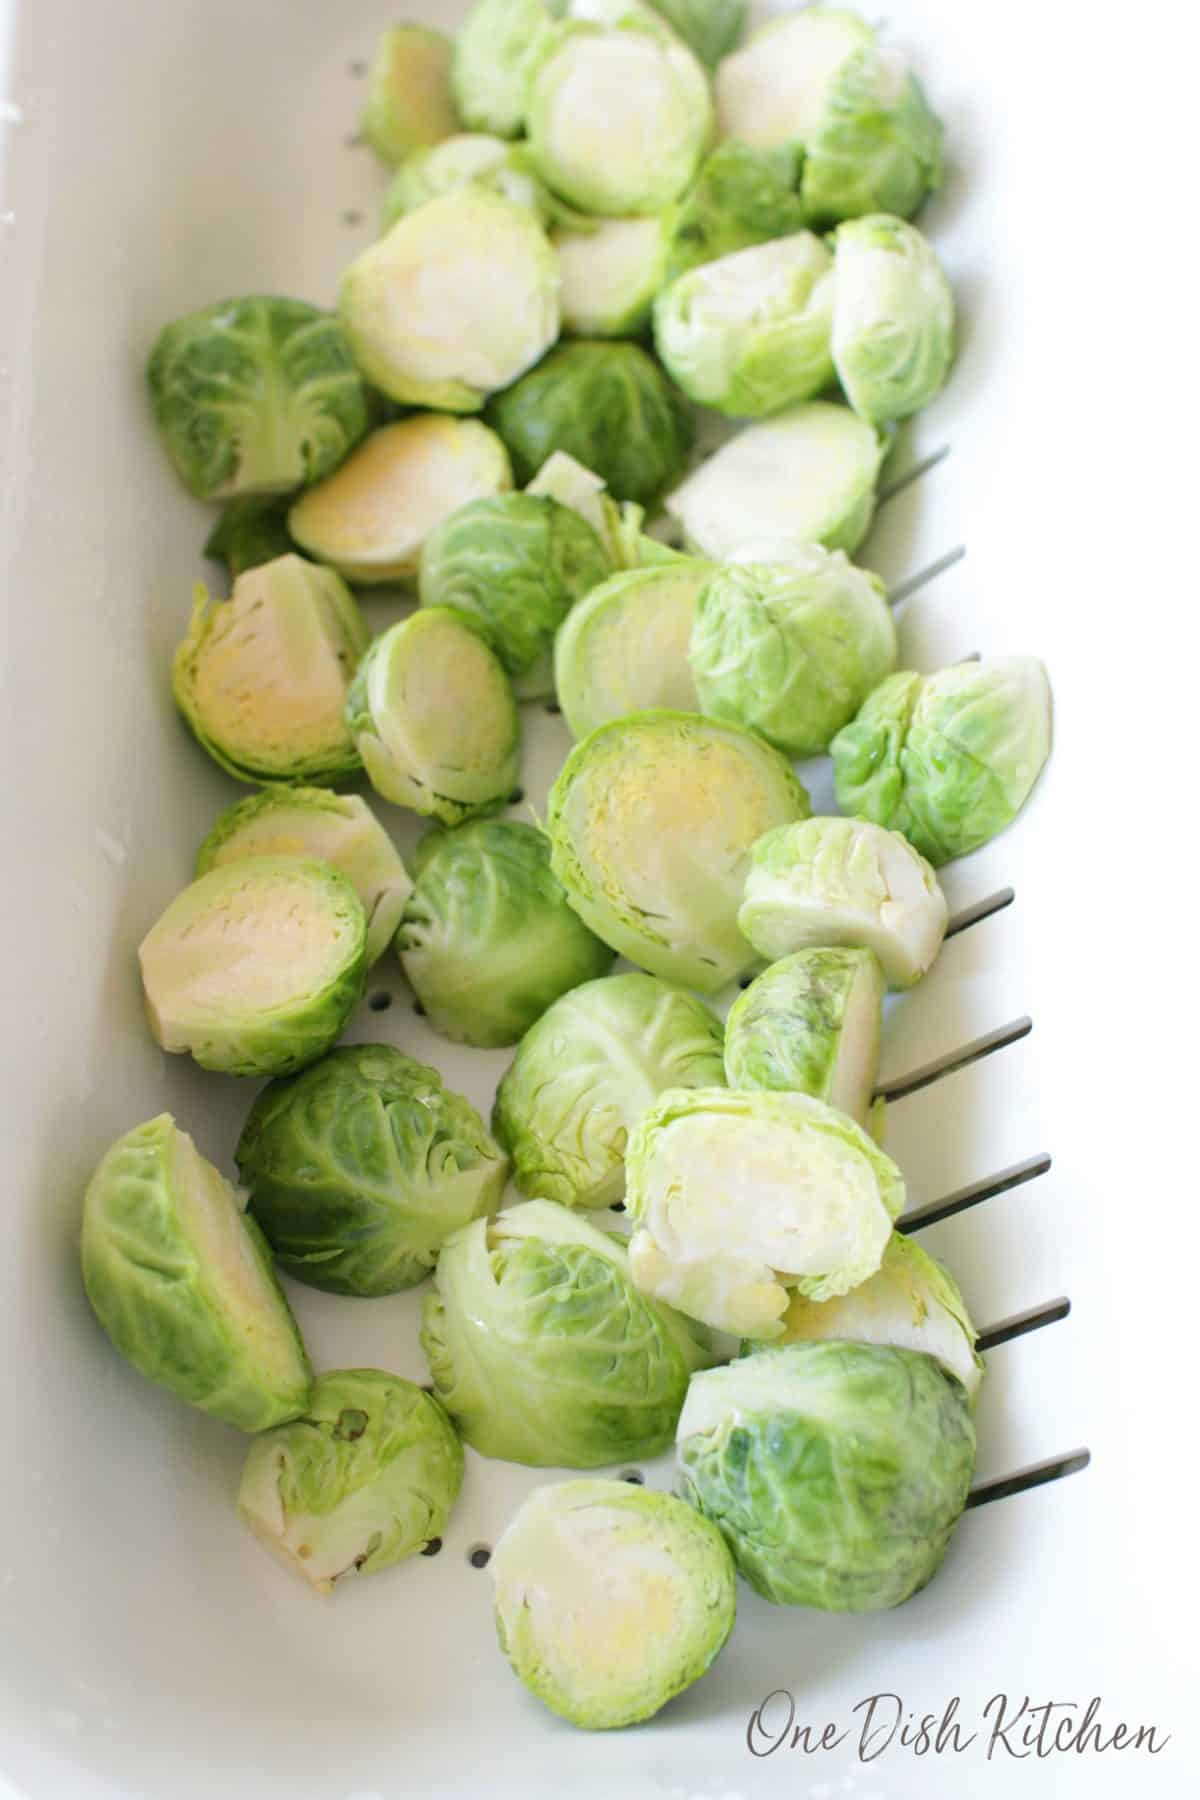 rinsed brussels sprouts in a colander.